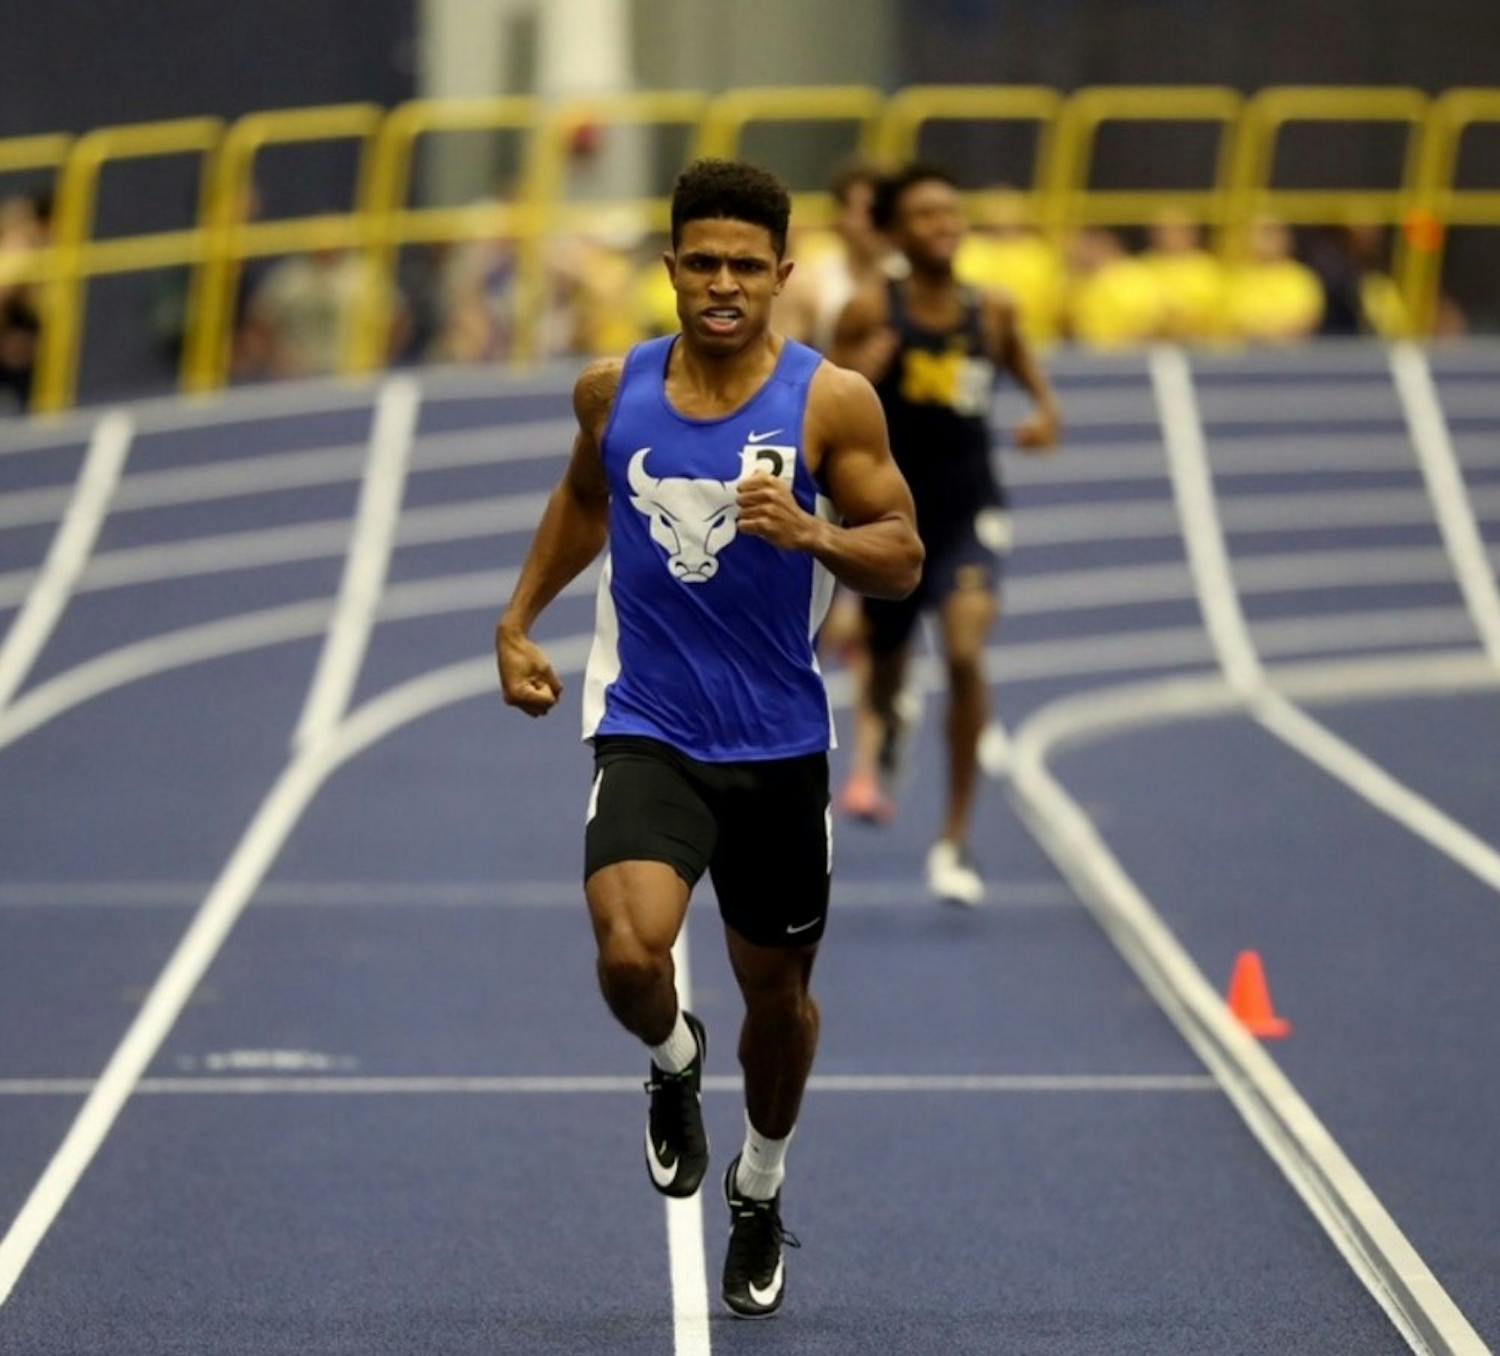 Leon Atkins competes at the Wolverine Invite, hosted by the University of Michigan. Atkins broke the school record for the 600m event with a 1:18.86 time.